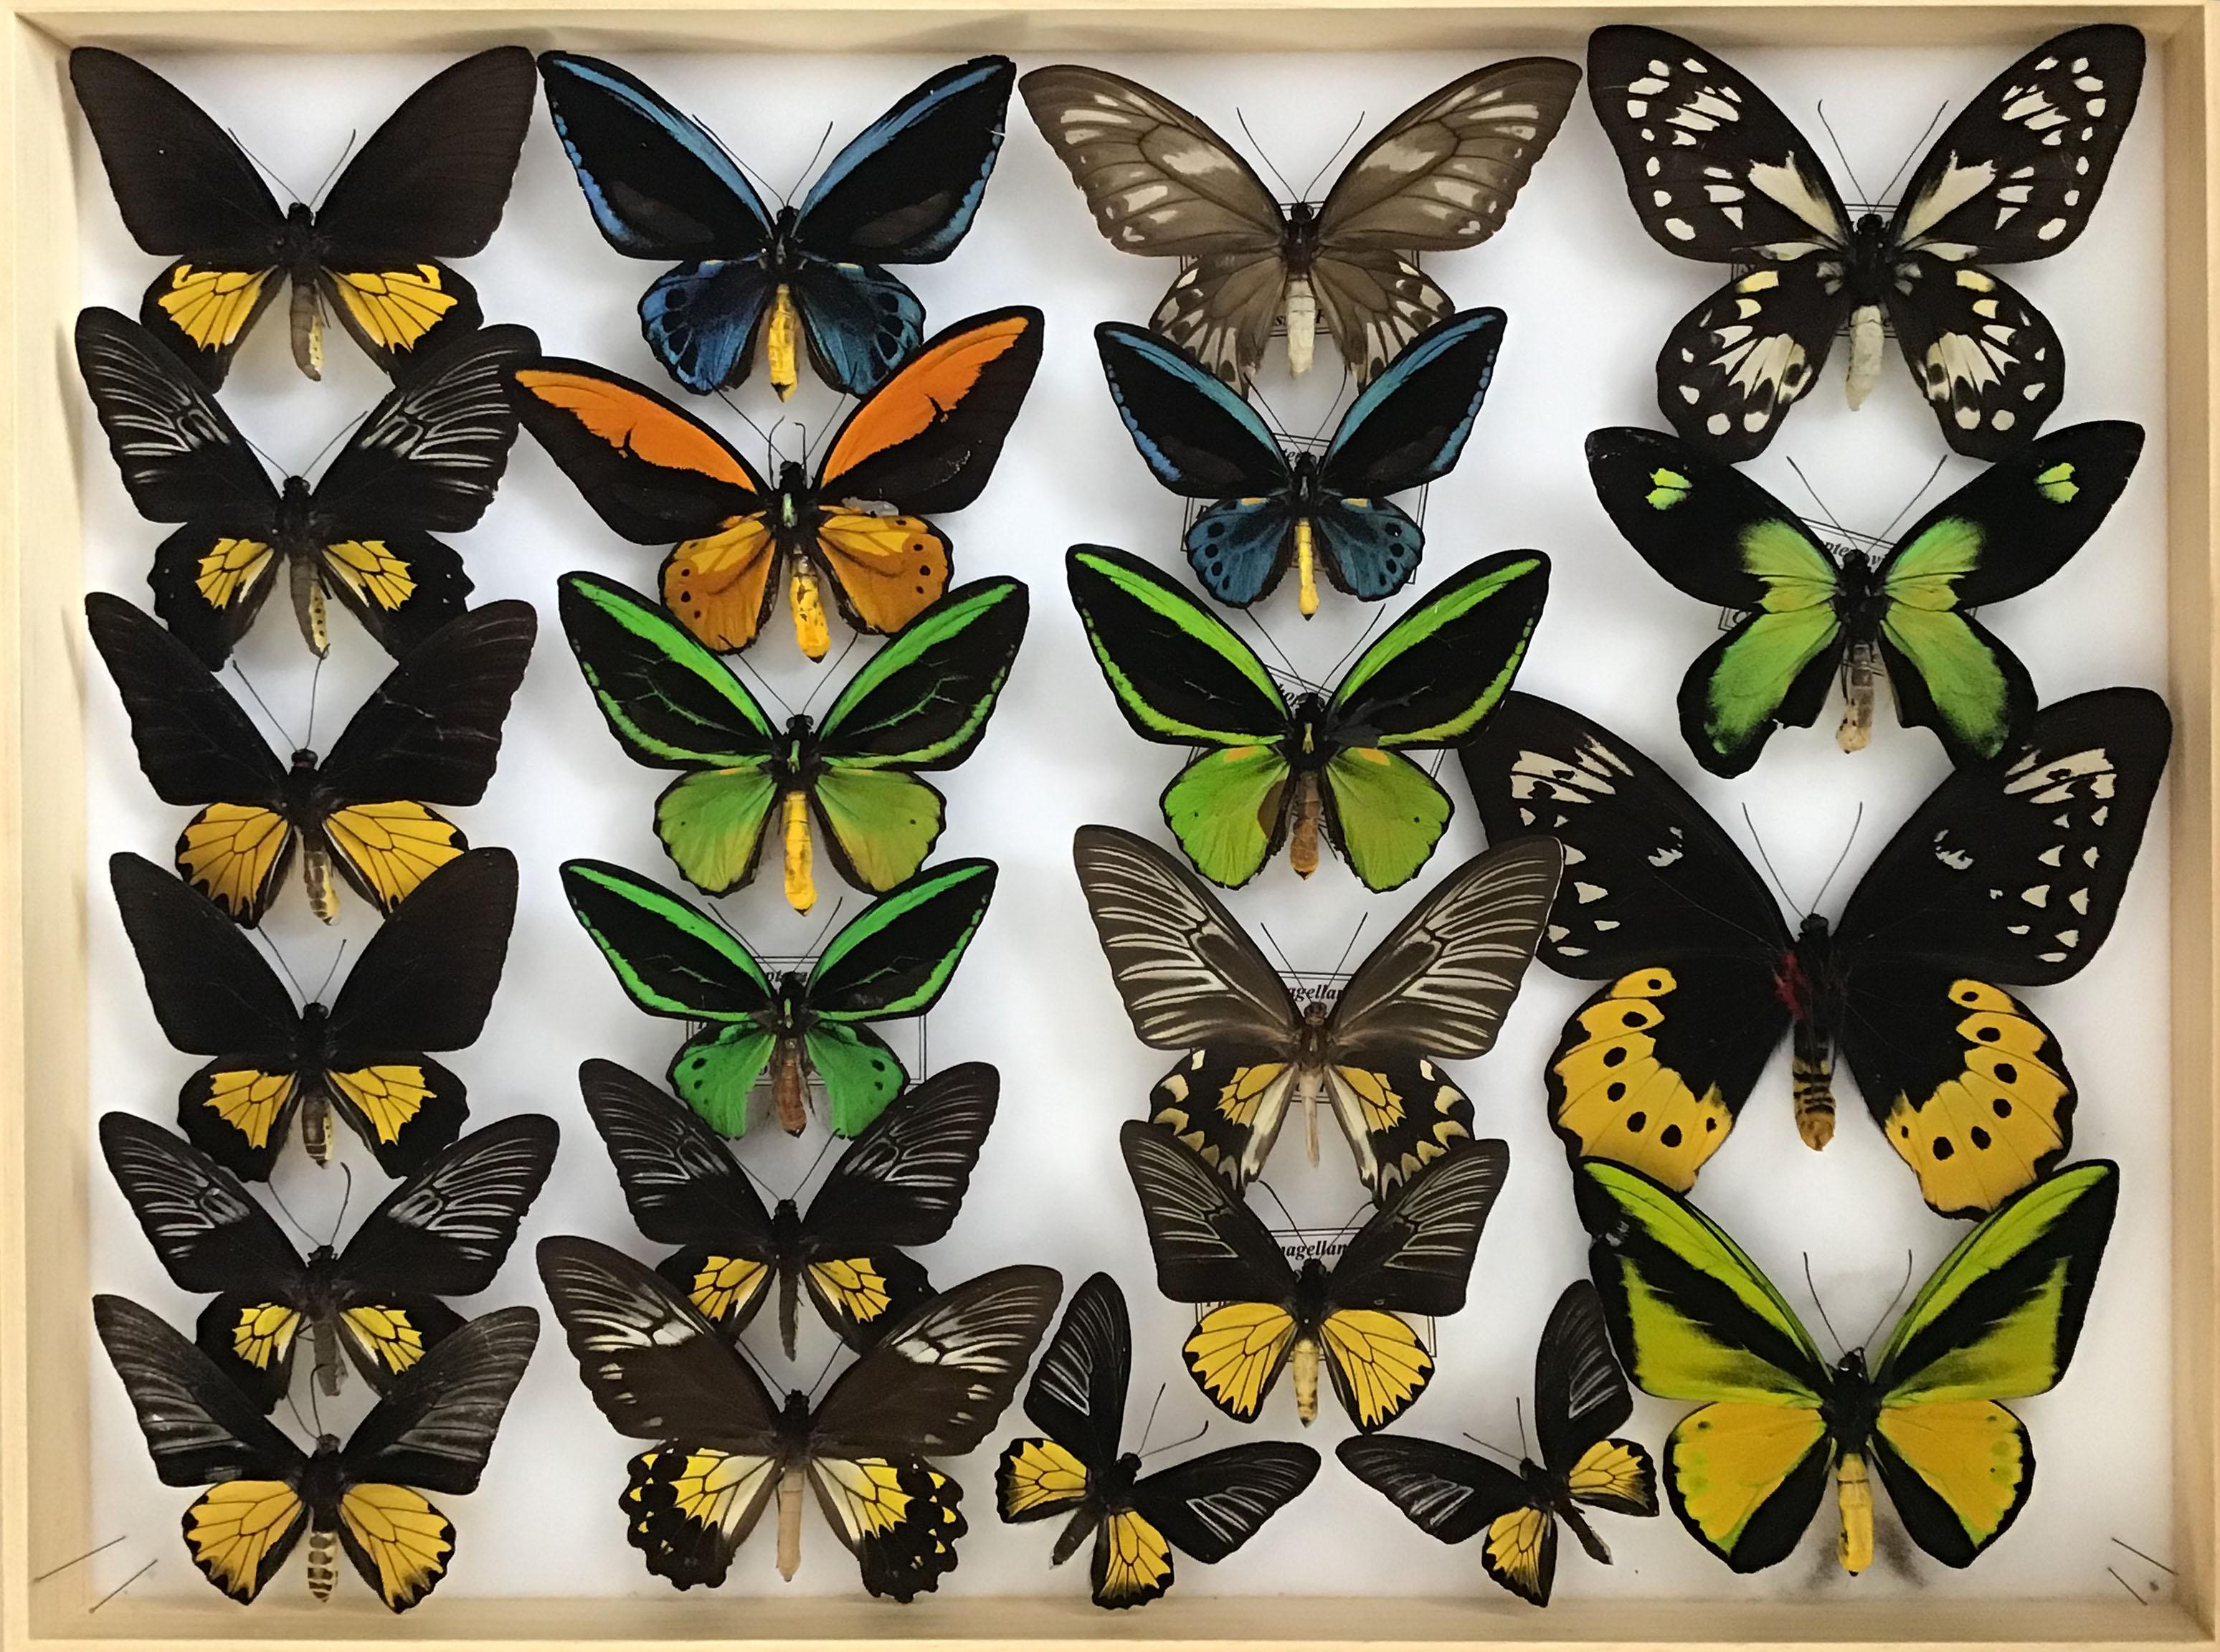 Set of 55 birdwing butterflies from Papau New Guinea, presented in a pair of custom ash shadow boxes on a silk white background. These specimens are extremely rare, including three spectacular Ornithoptera Victoriae, and have been curated from a